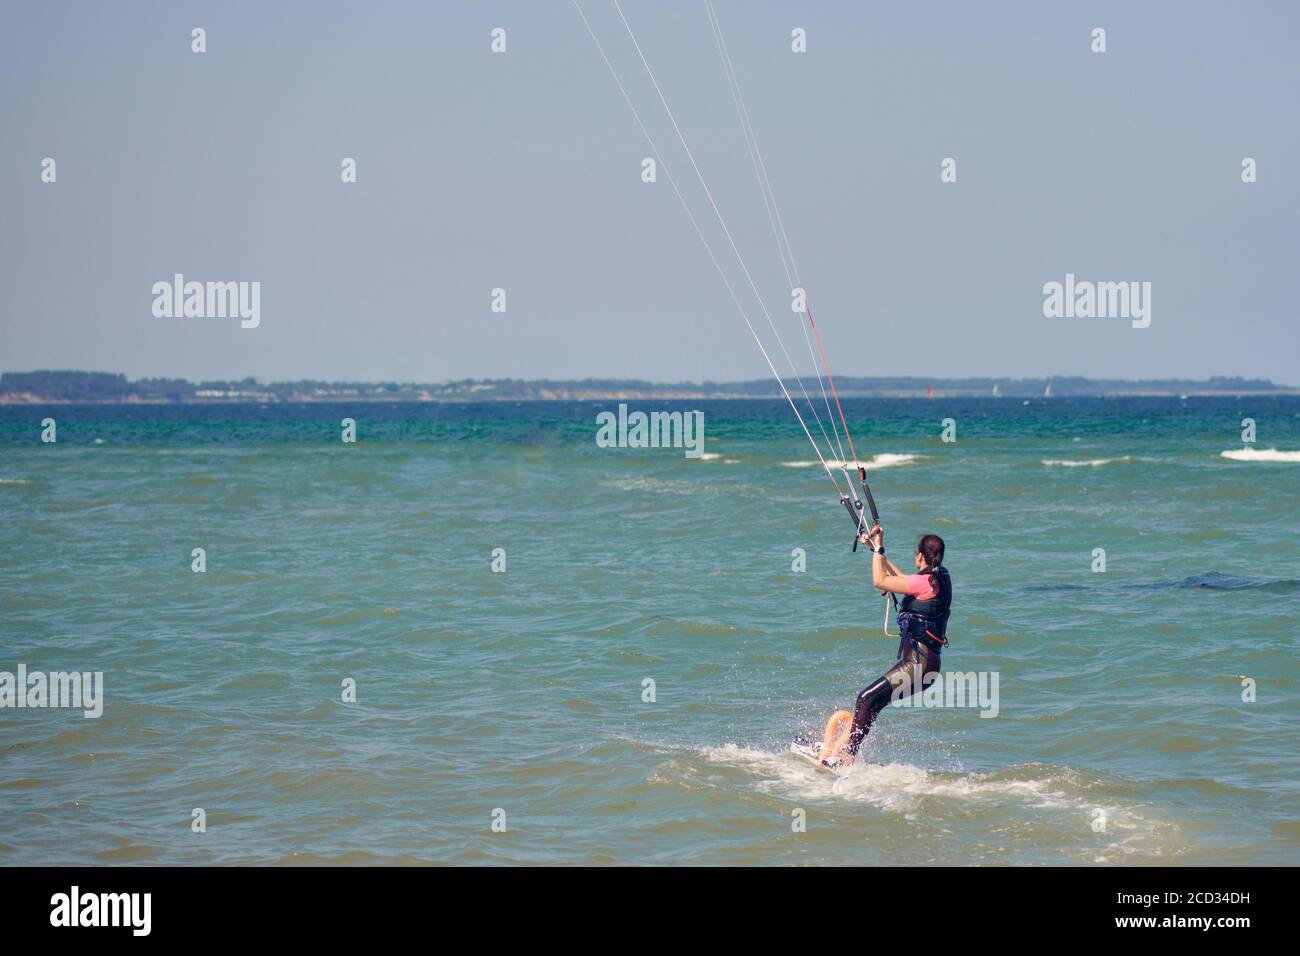 Brunette woman kitesurfing or kite boarding pulling away from the sandy beach making for deeper water on a sunny summer day in a rear view to the came Stock Photo